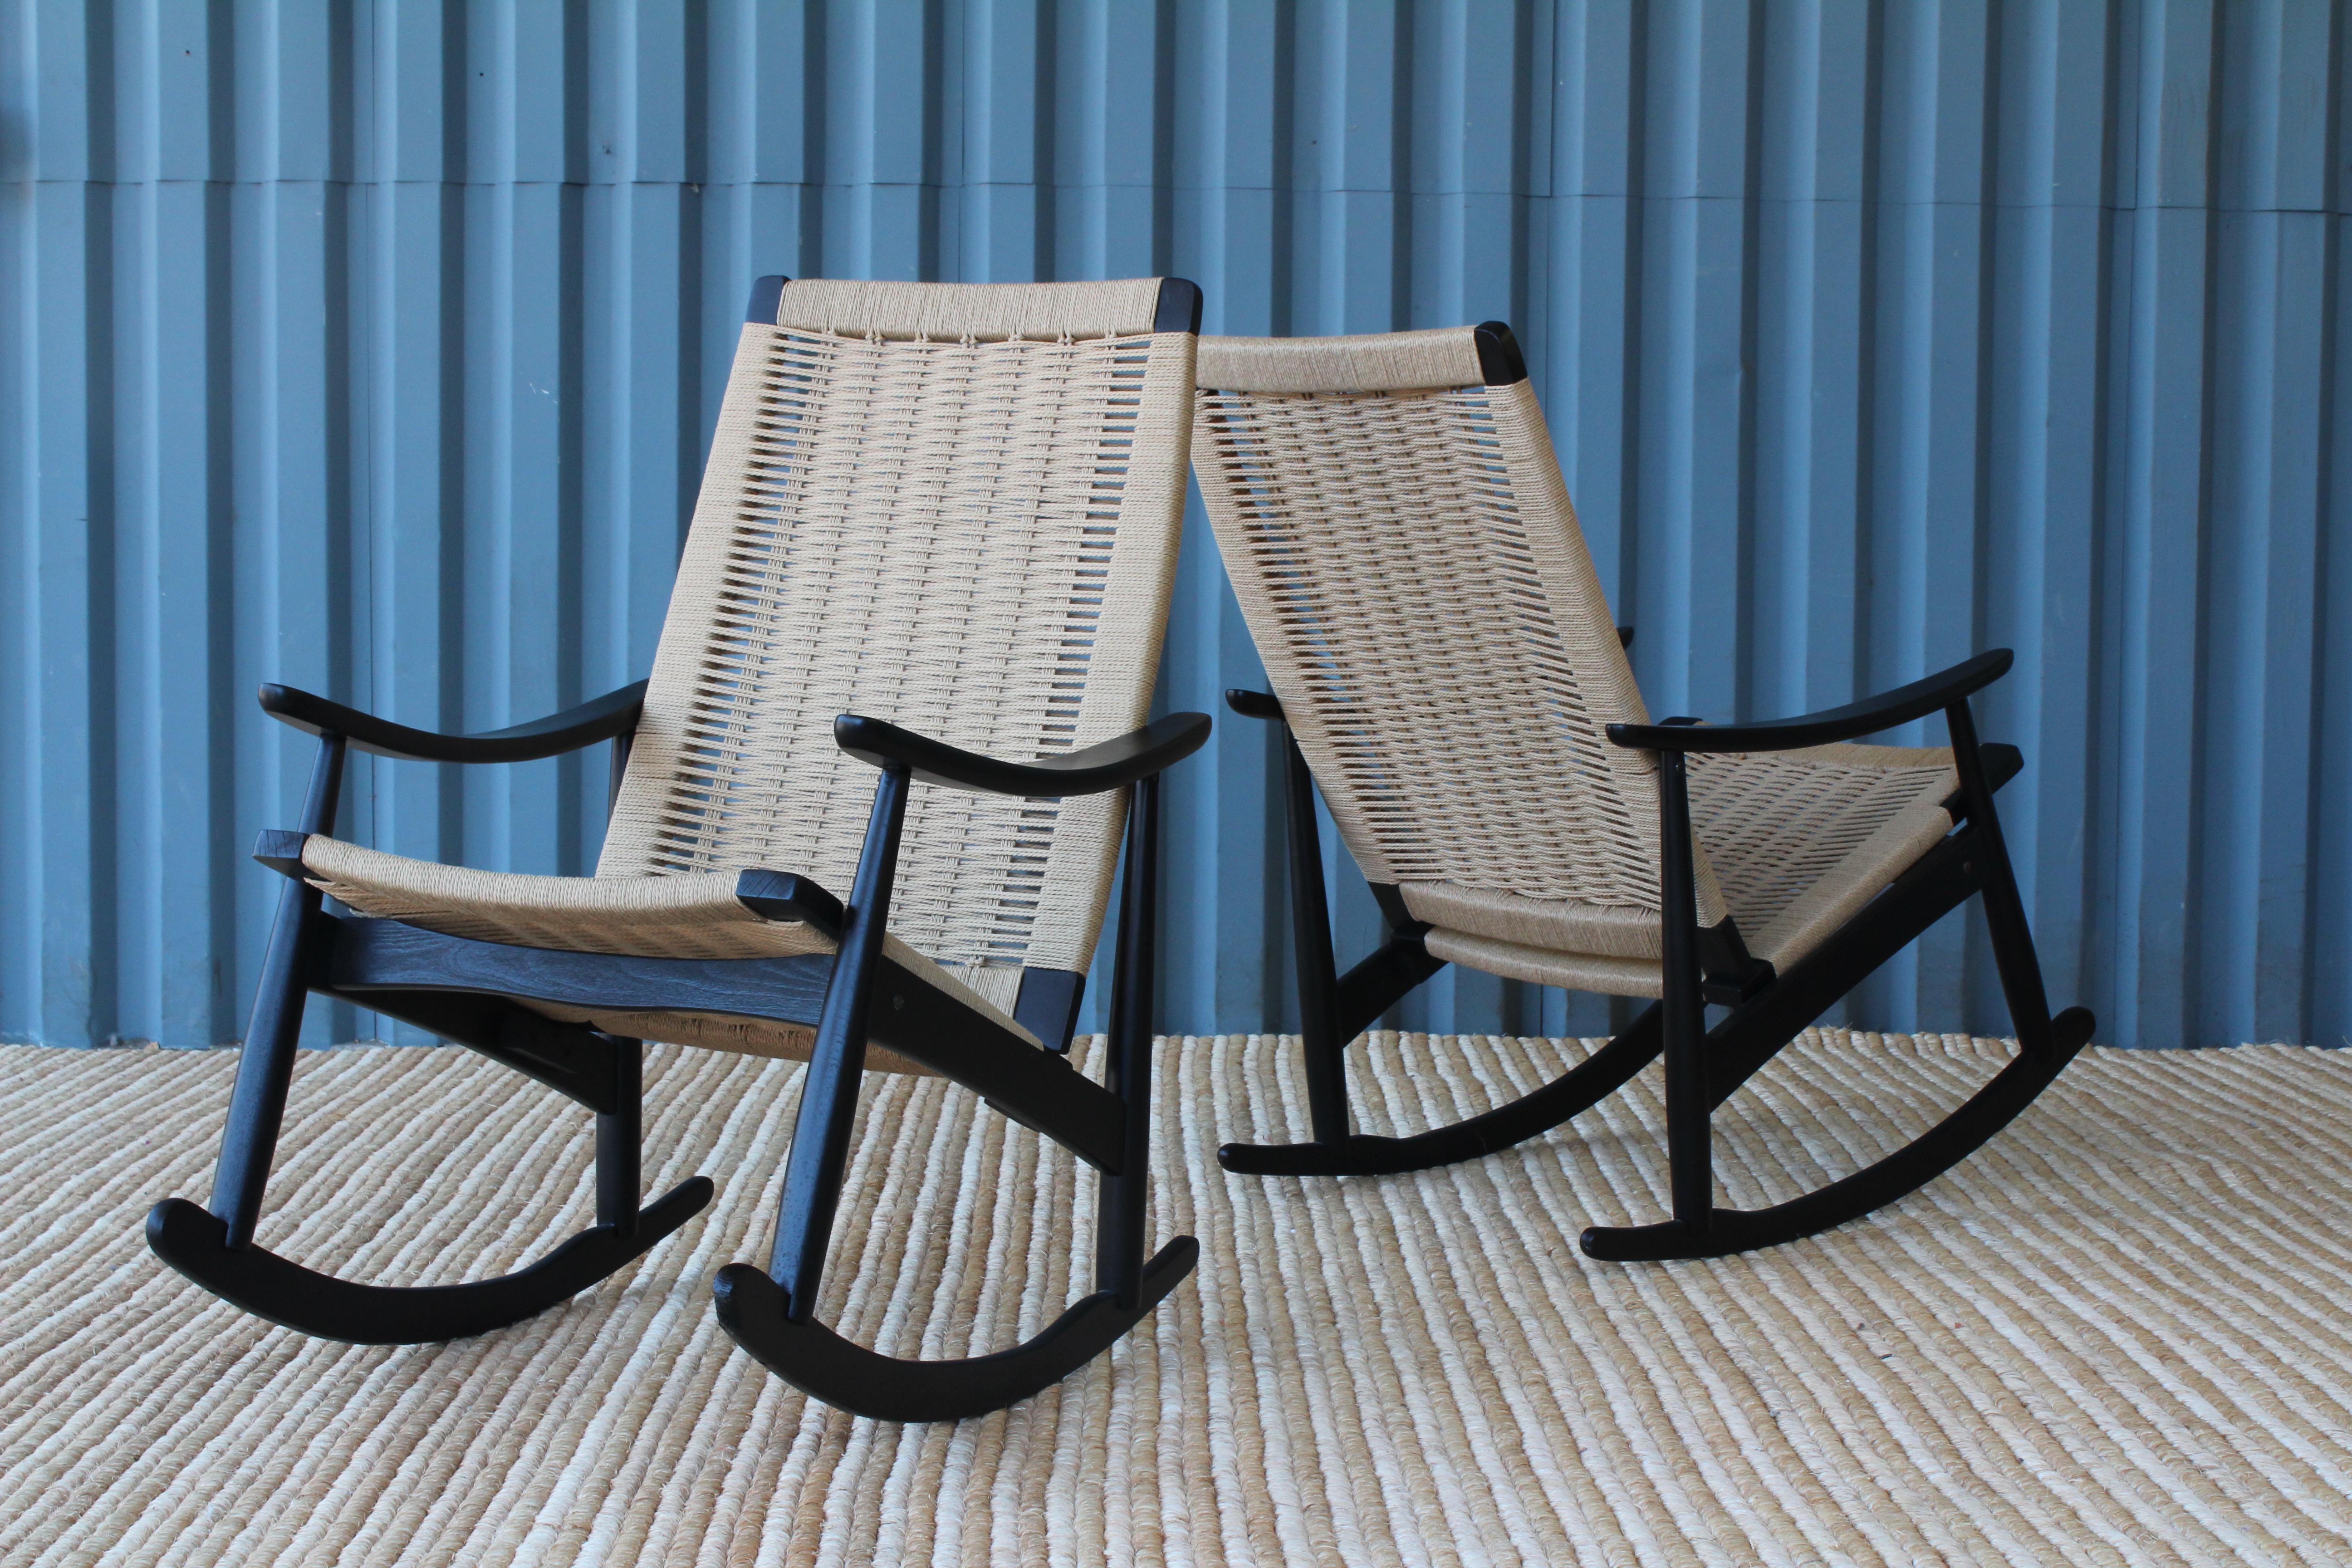 Pair of 1960s rocking chairs. The pair have been recently refinished in a satin black finish and feature new Danish cord seats. Sold individually, pair available.